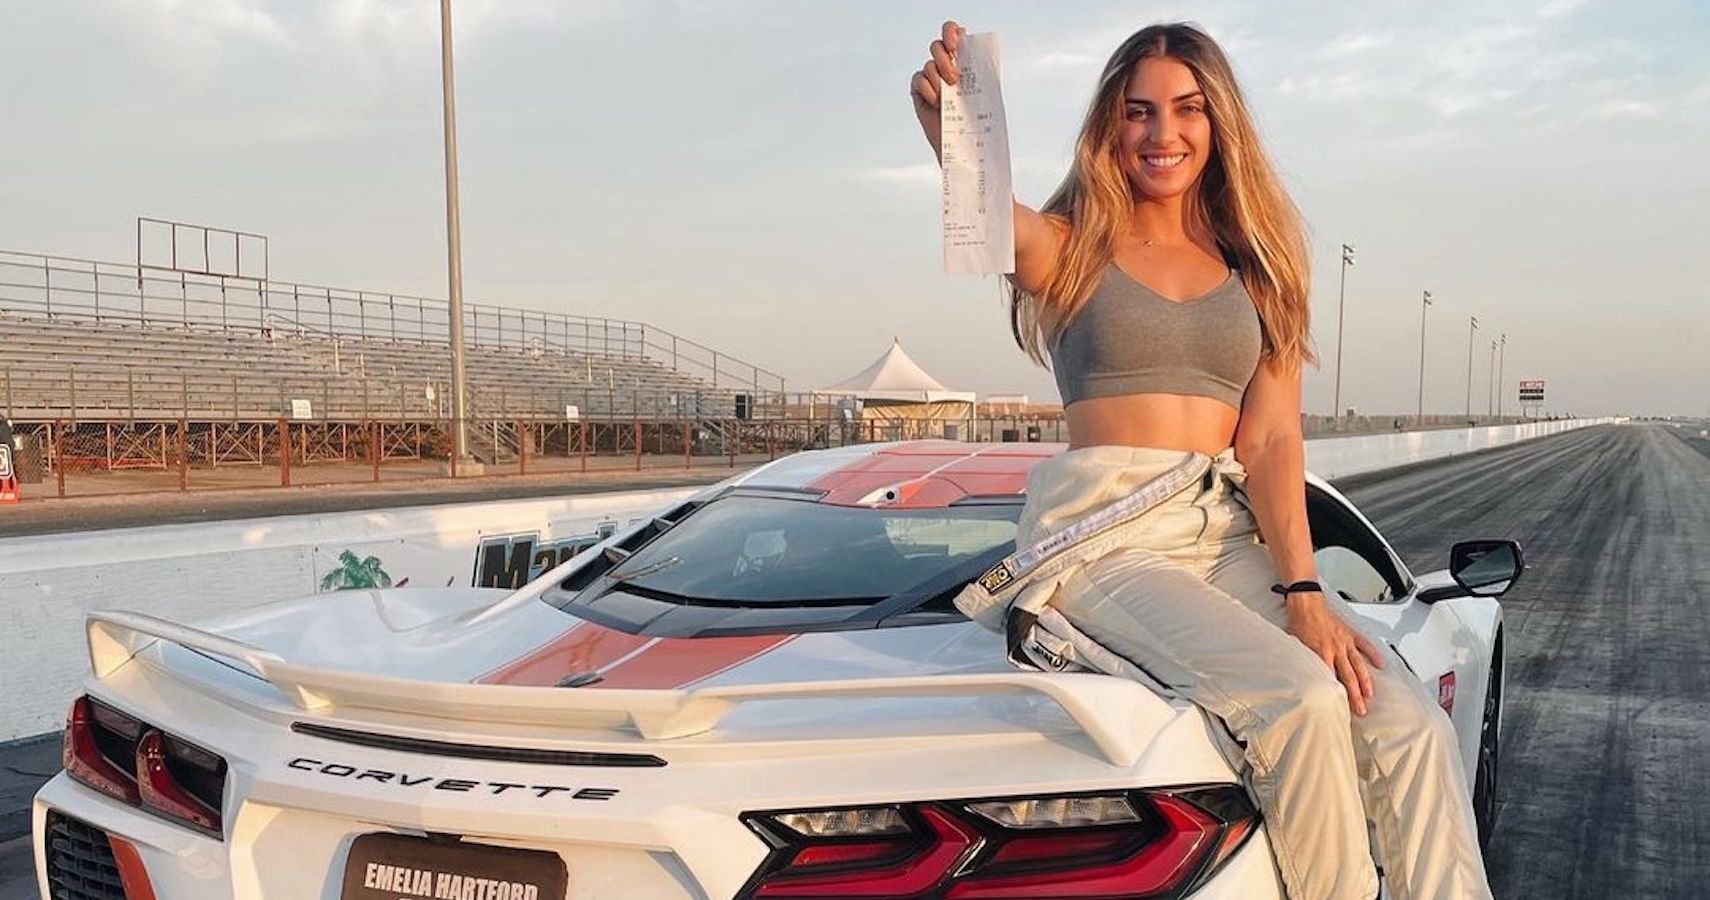 World's Fastest C8 Corvette Owner Gets Tempting Offer To Sell Her Supercar